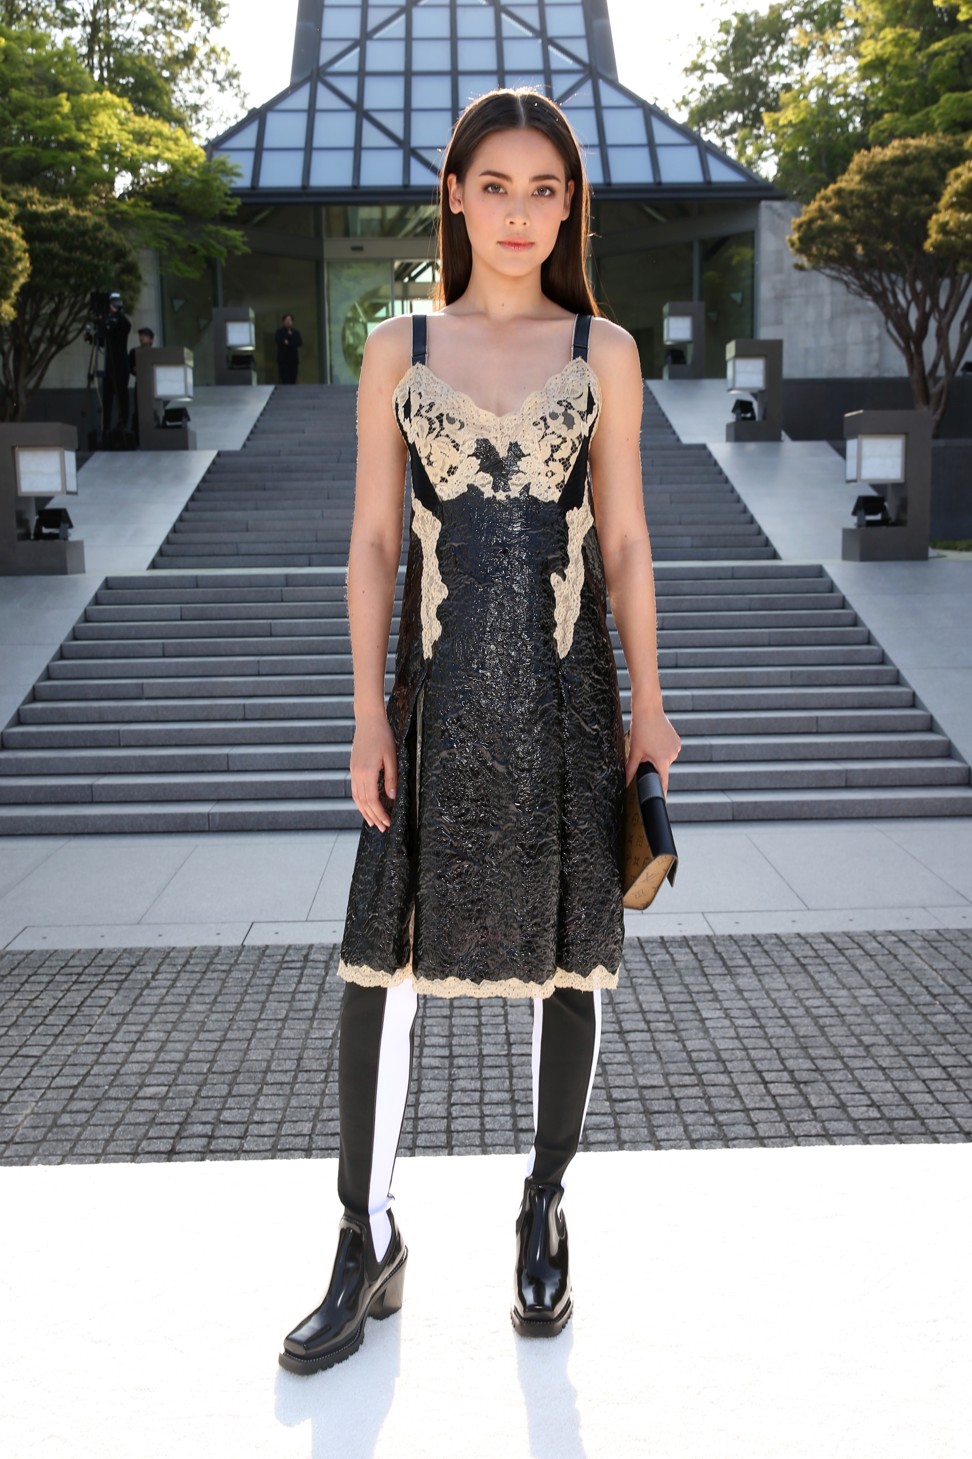 Louis Vuitton cruise show in Kyoto draws celebrity front rowers | Style Magazine | South China ...